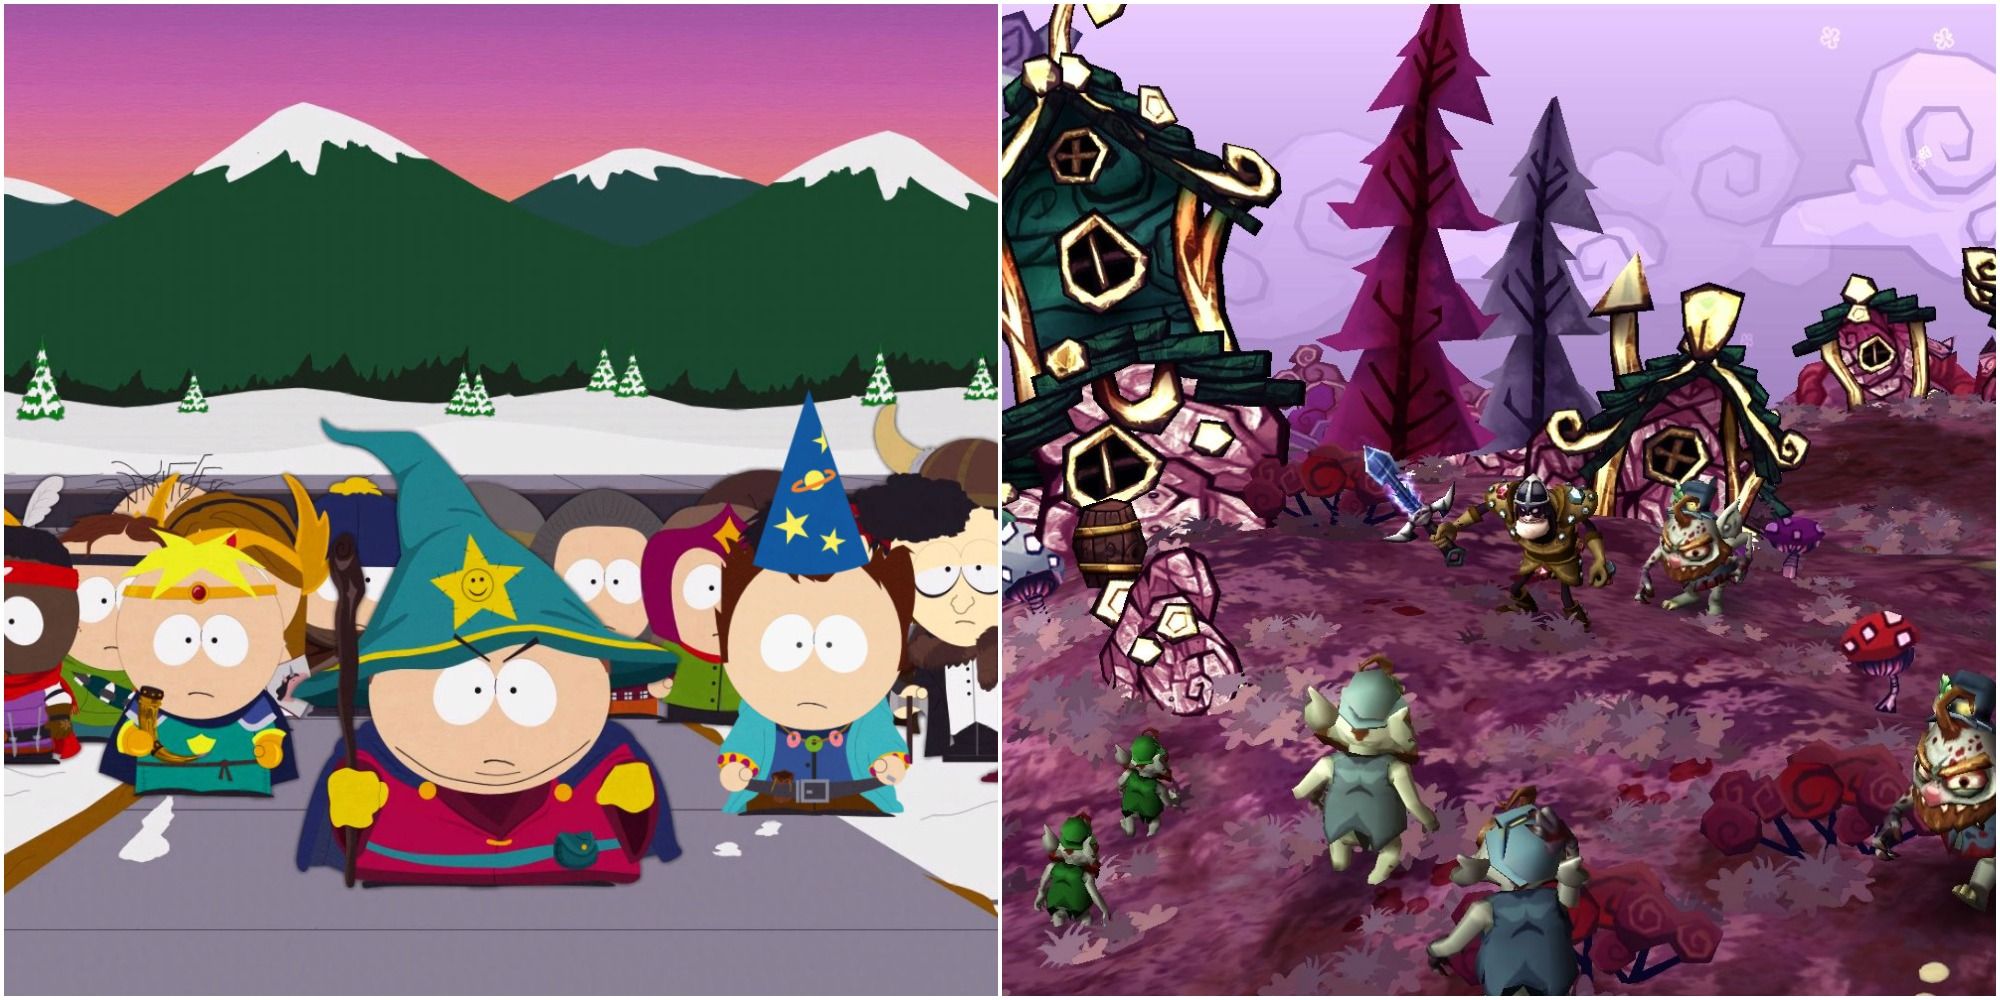 A collage showing scenes and gameplay from South Park: The Stick of Truth and DeathSpank